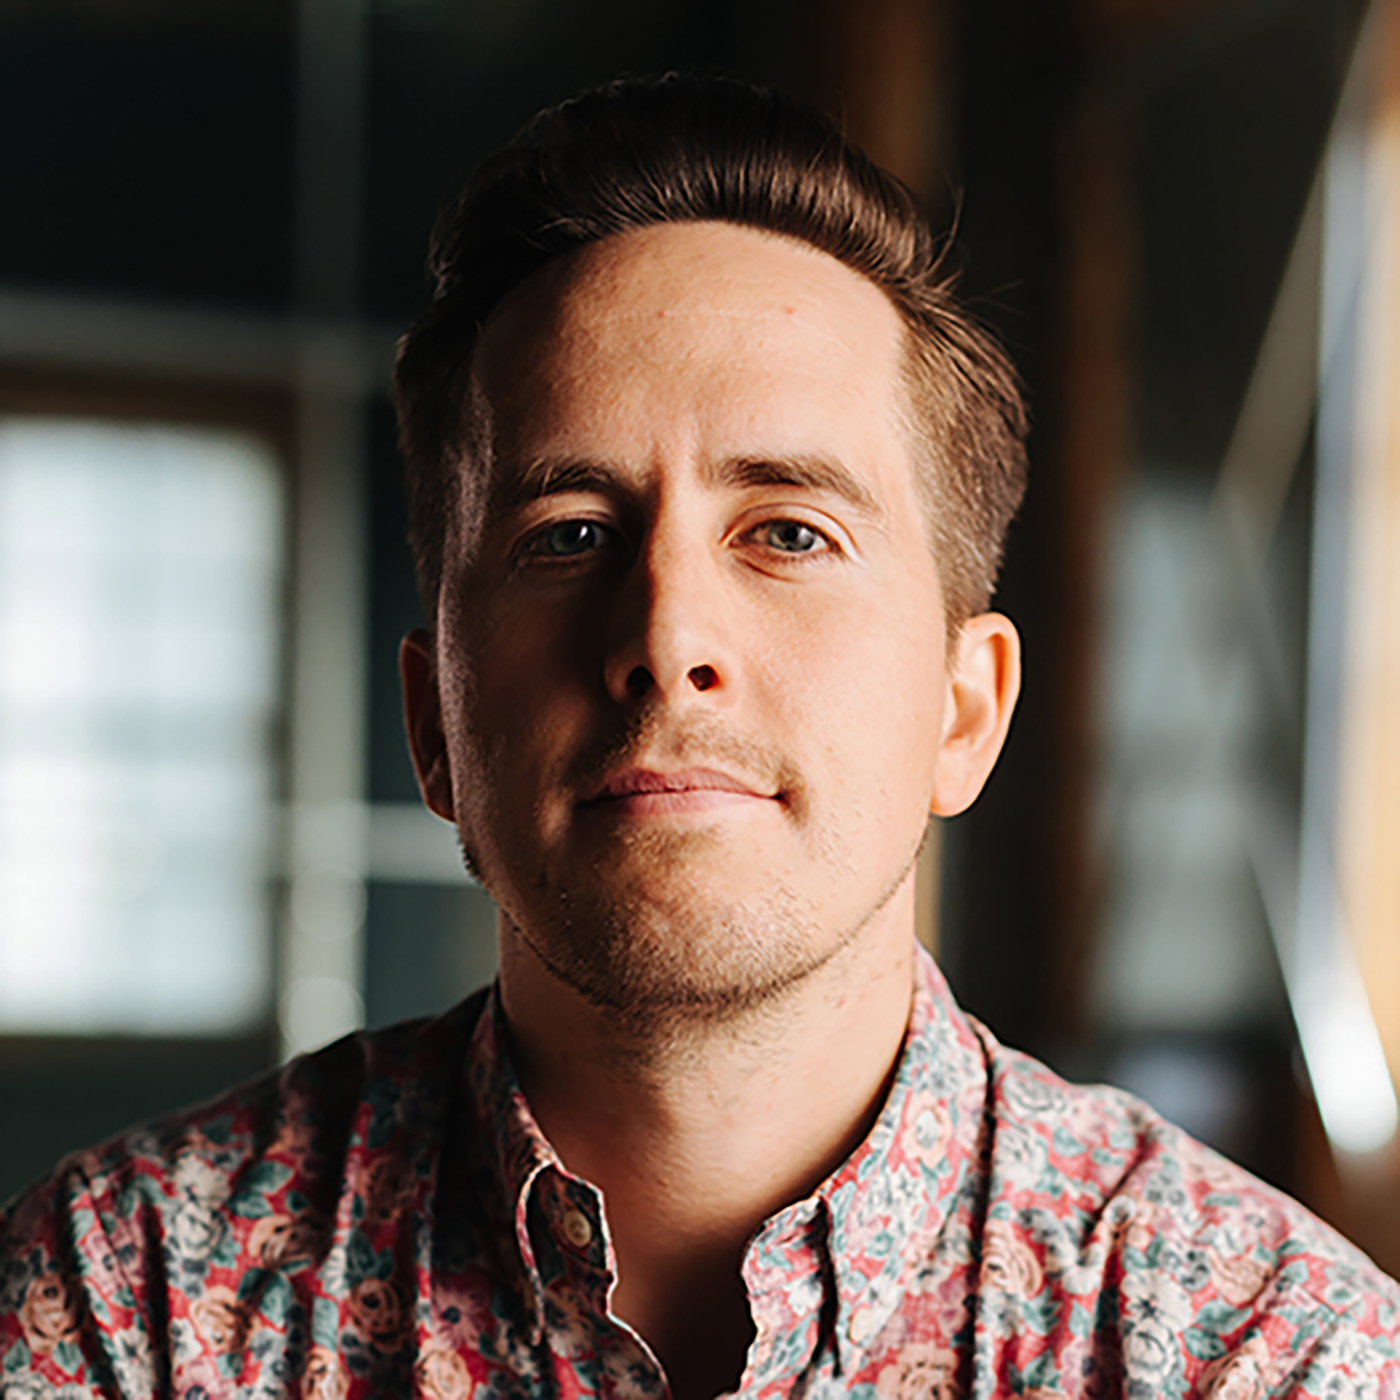 Chris Kelly of Kelly&Kelly on podcasting and the future of creative audio